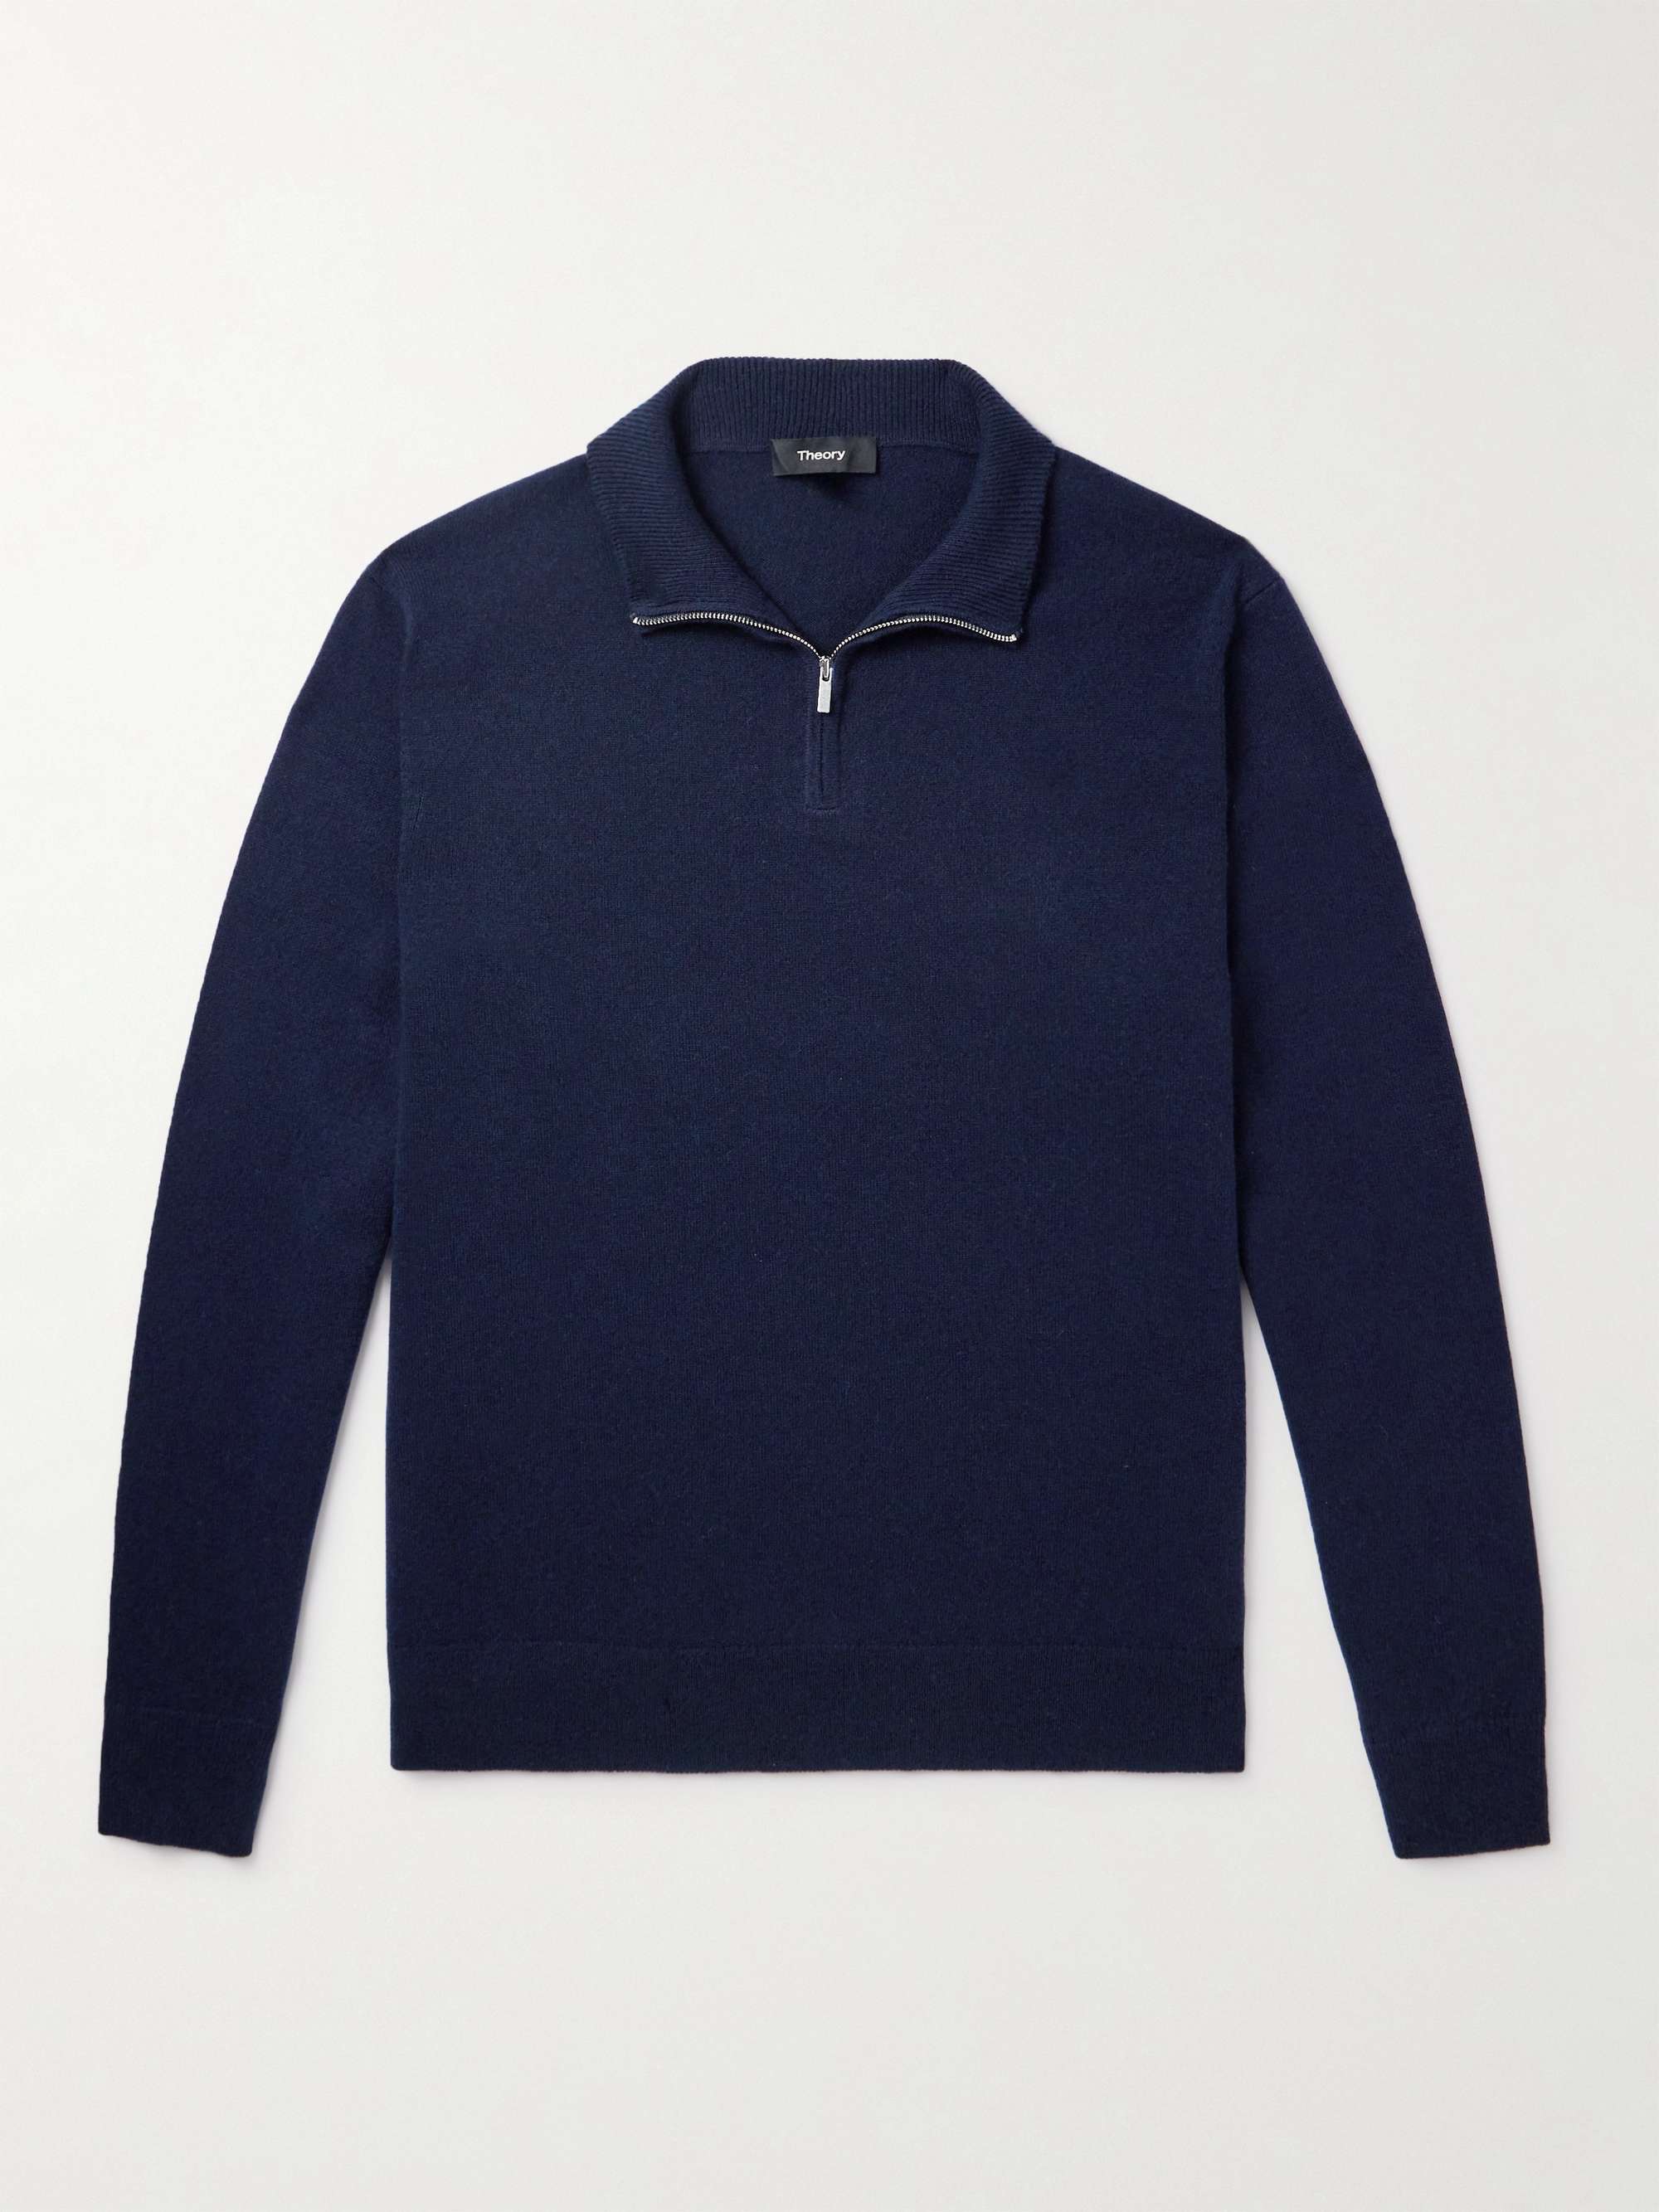 THEORY Hilles Cashmere Half-Zip Sweater for Men | MR PORTER